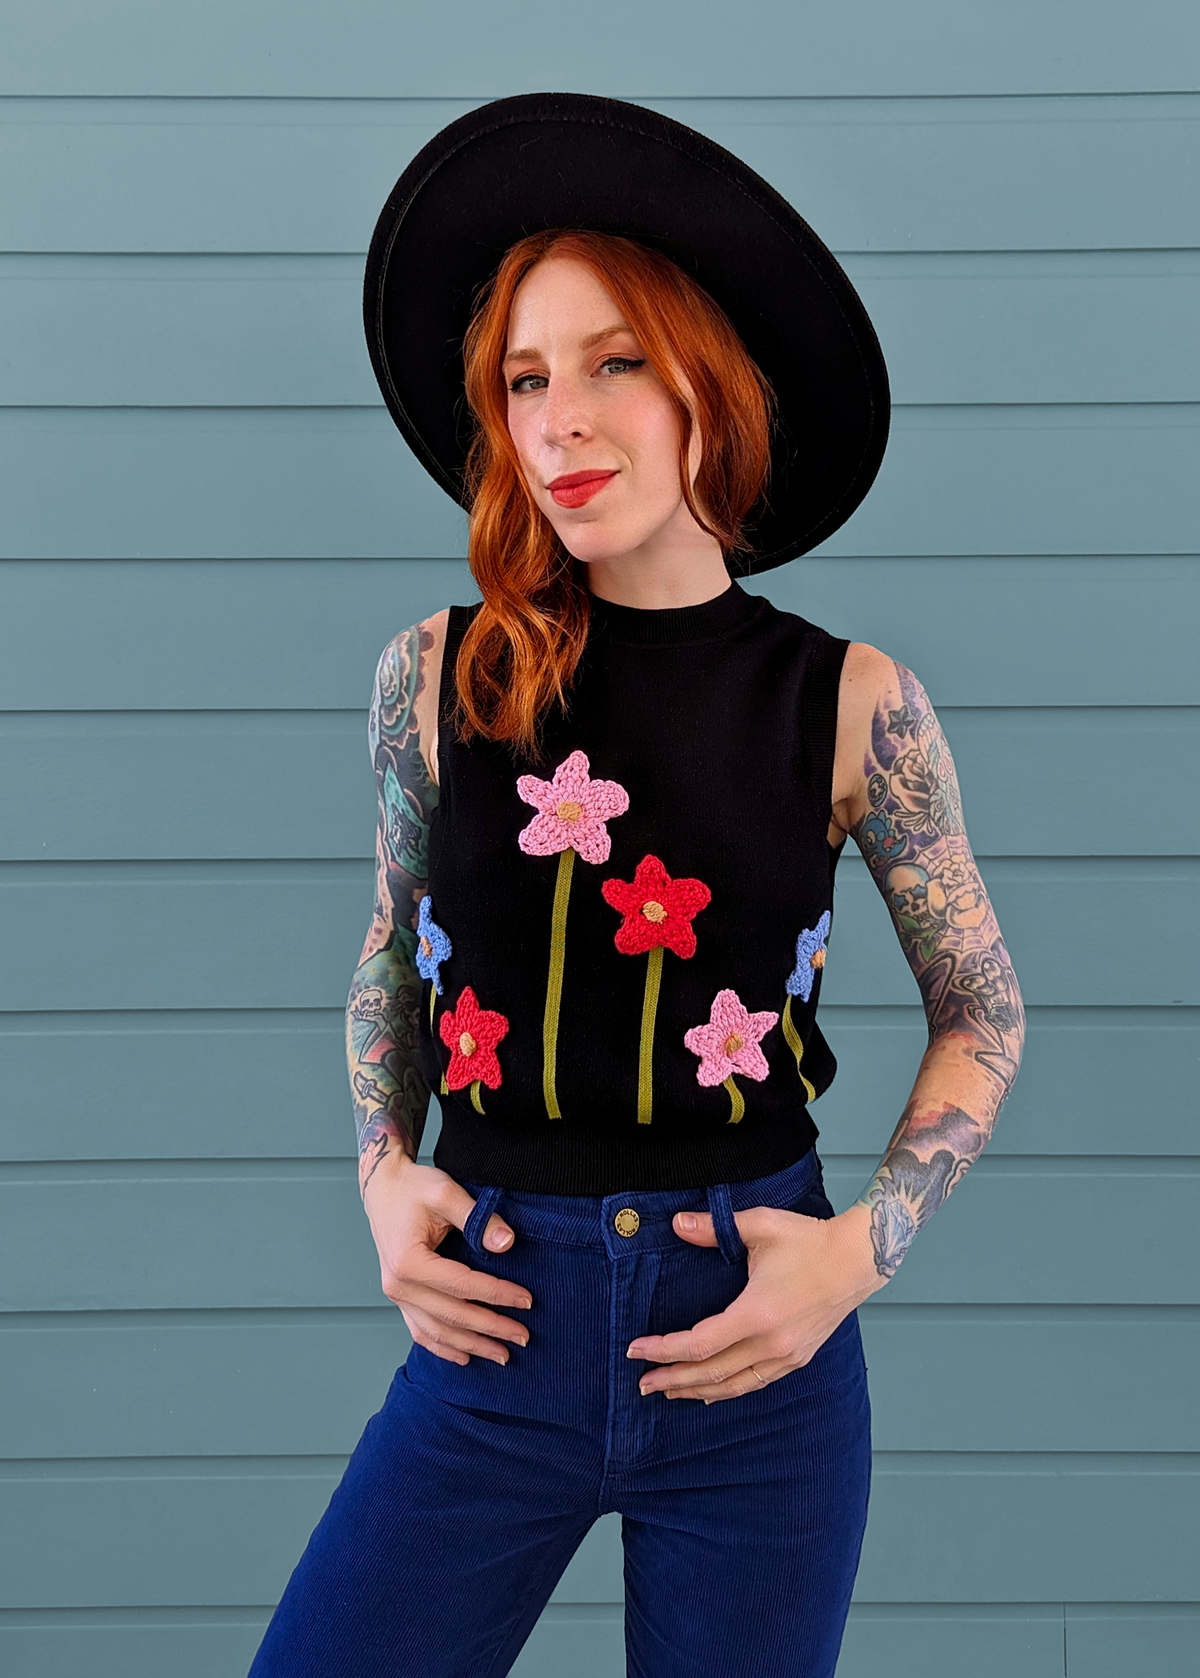 Black Organic Cotton Knit Sweater Vest with colorful crochet flowers at front, by Another Girl, sustainable and ethically made